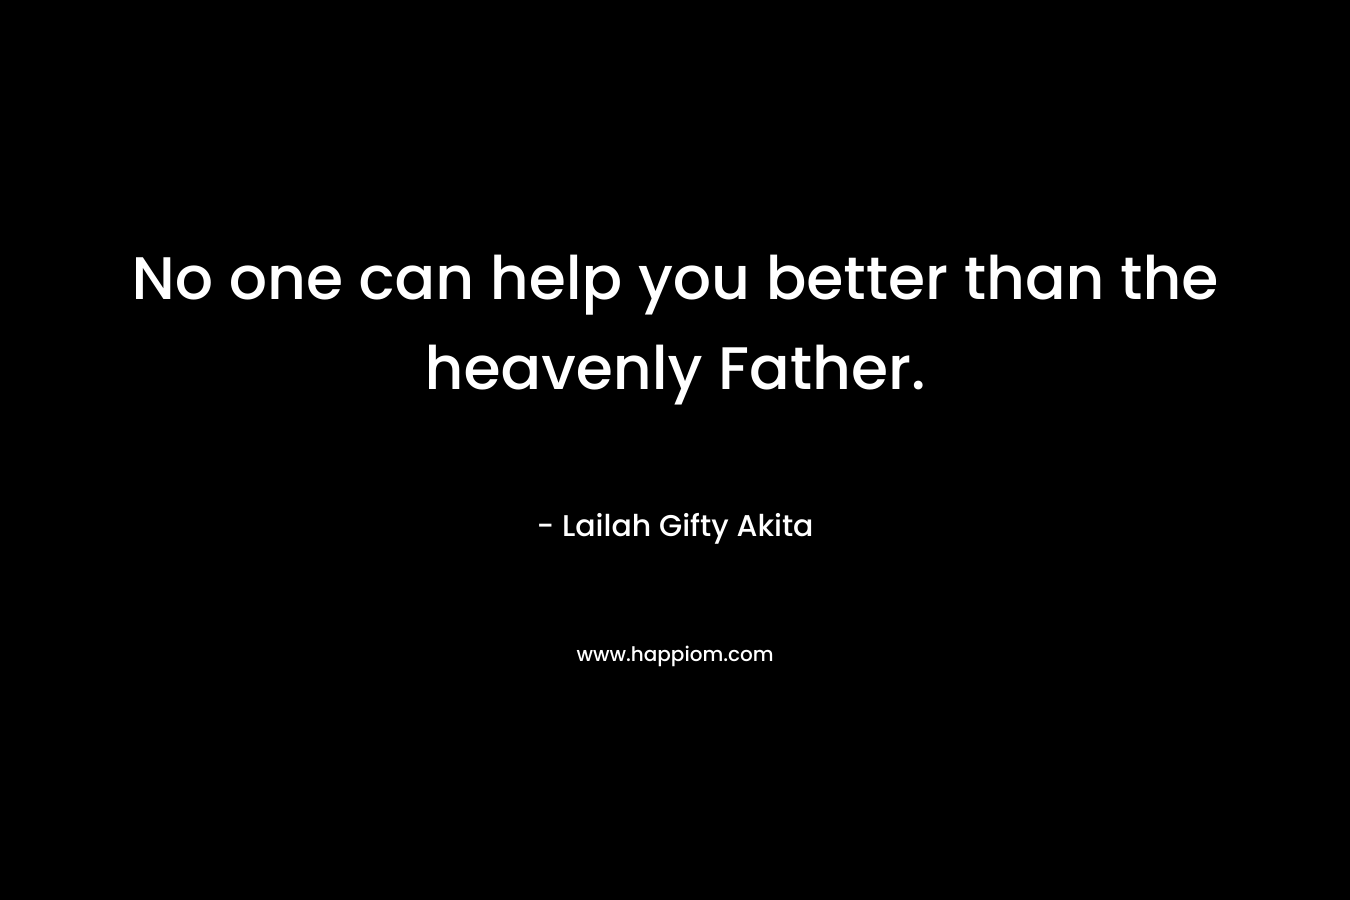 No one can help you better than the heavenly Father.